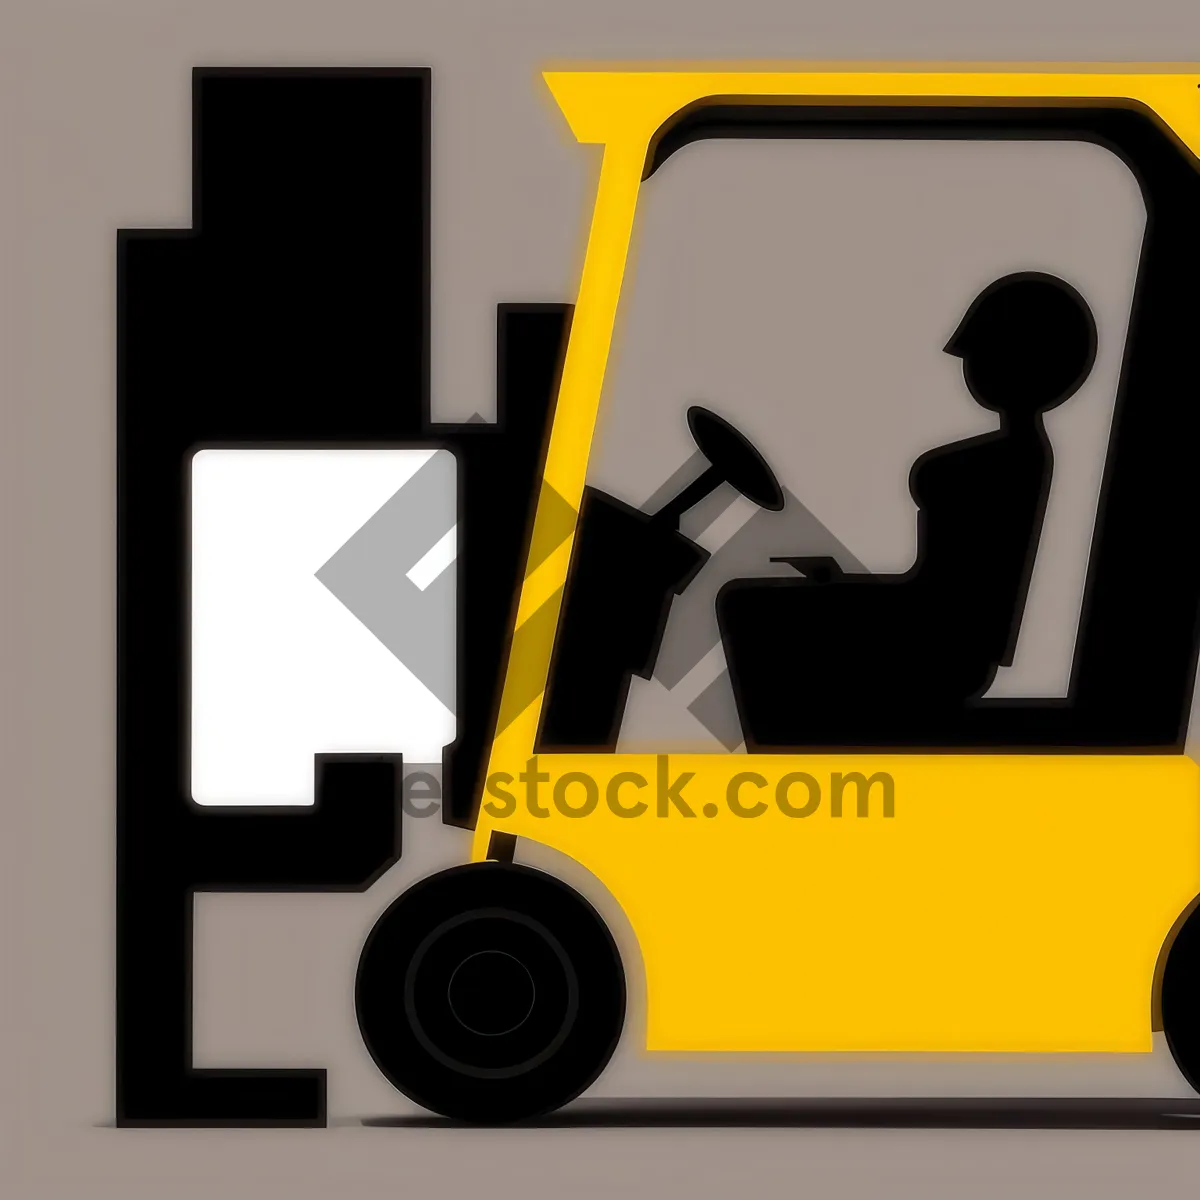 Picture of Transportation Symbol: Bus, Car, Truck - Self-Propelled Vehicle